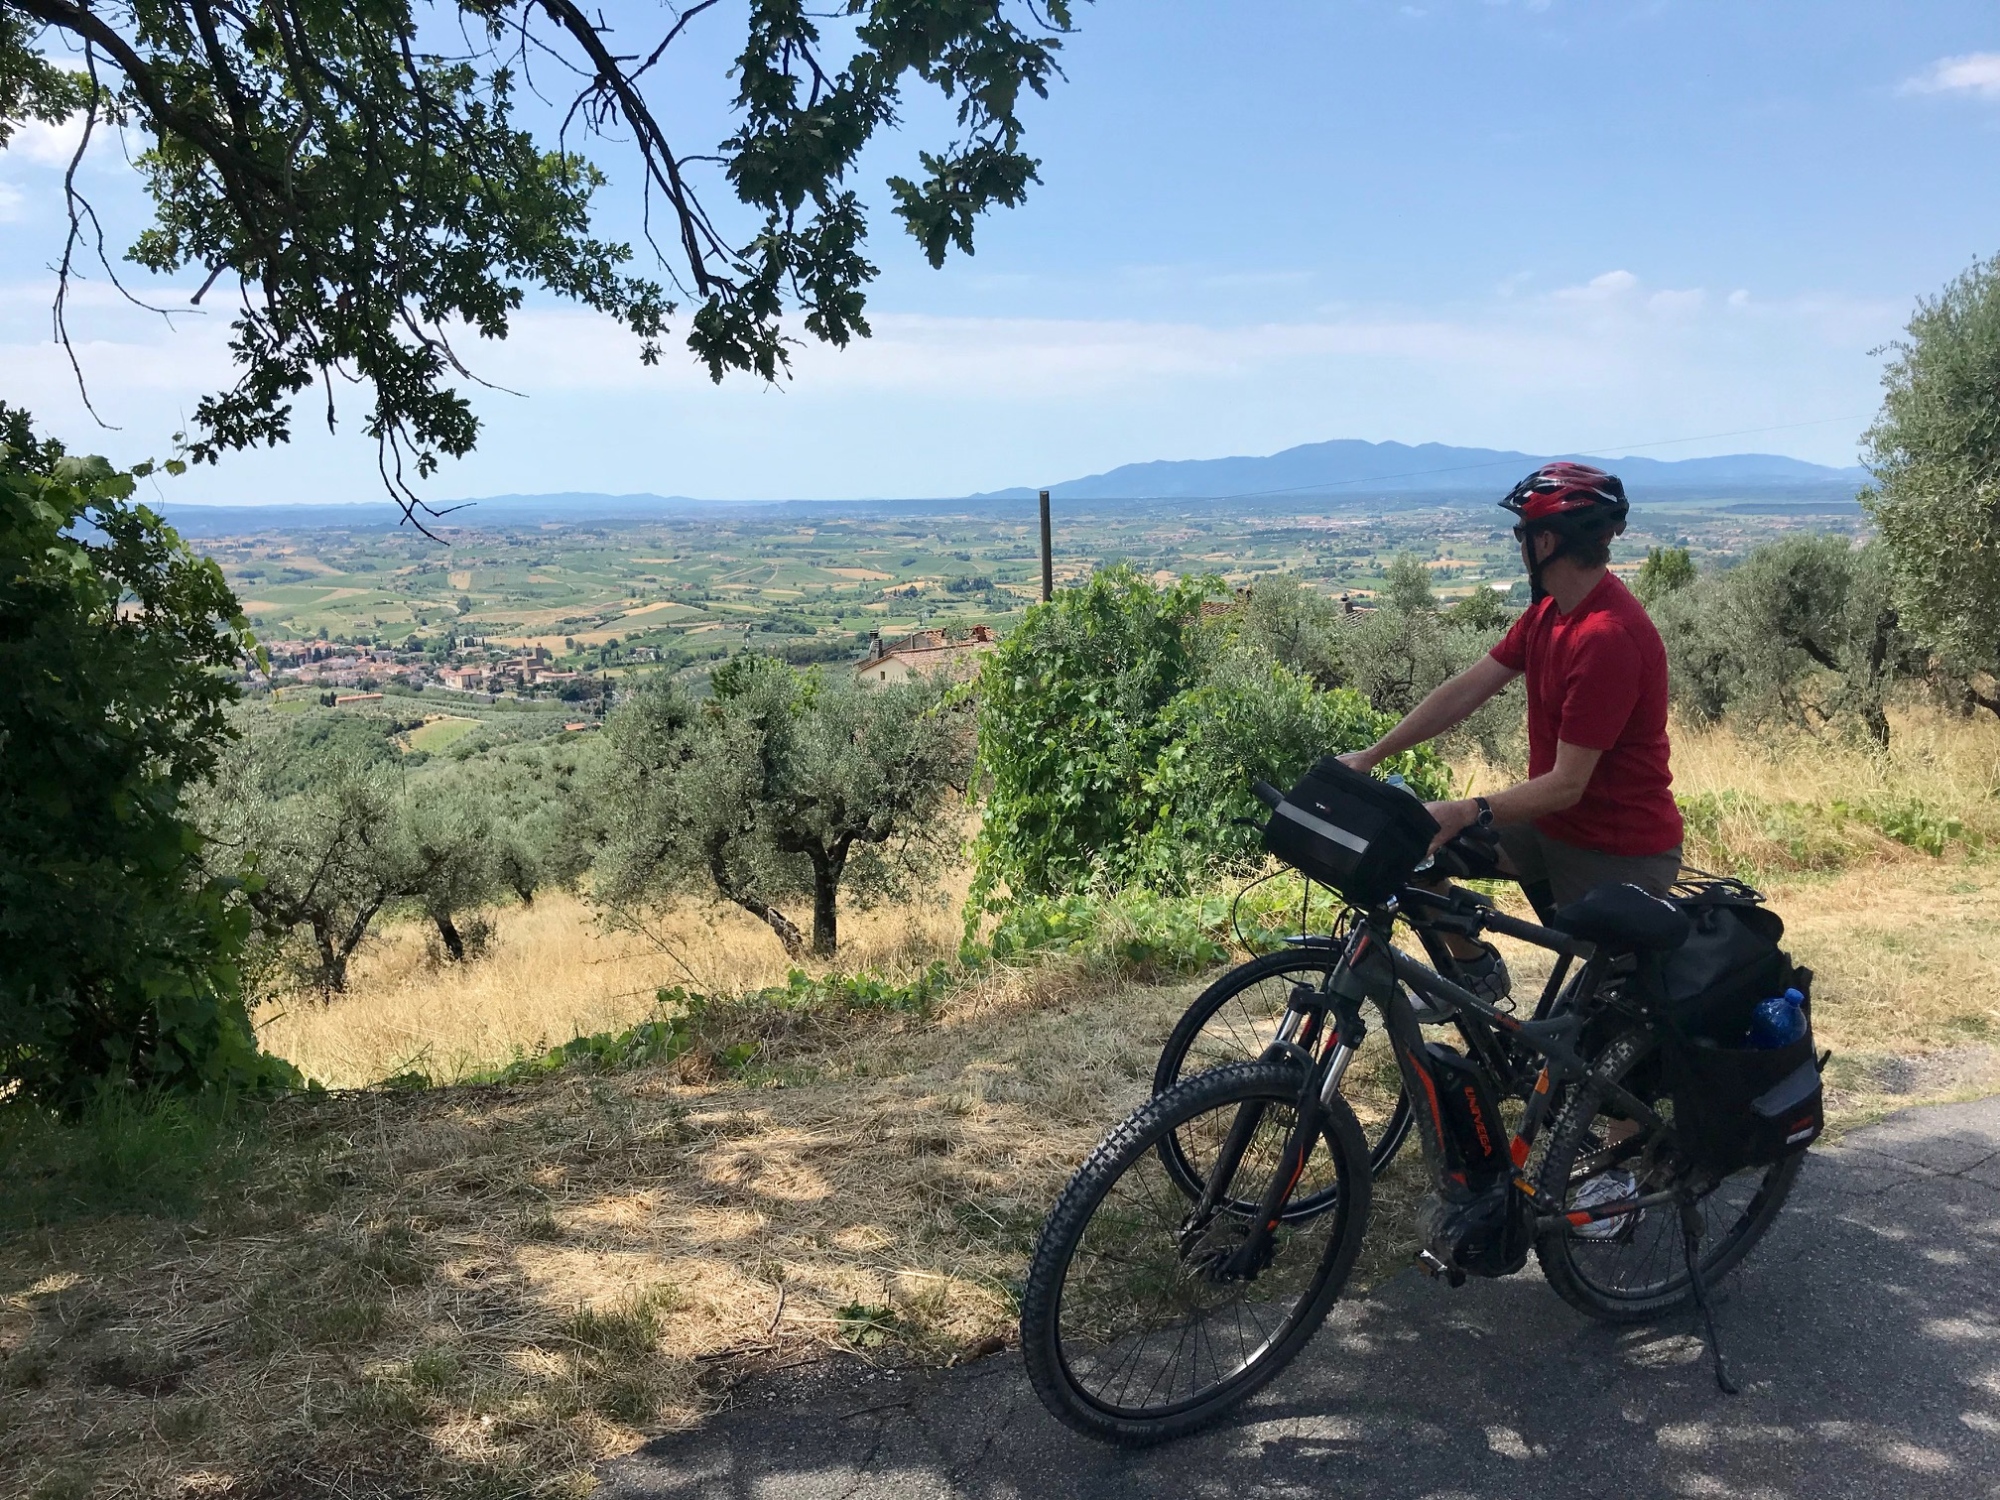 Eight-day self guided cycle tour from Lucca to Siena